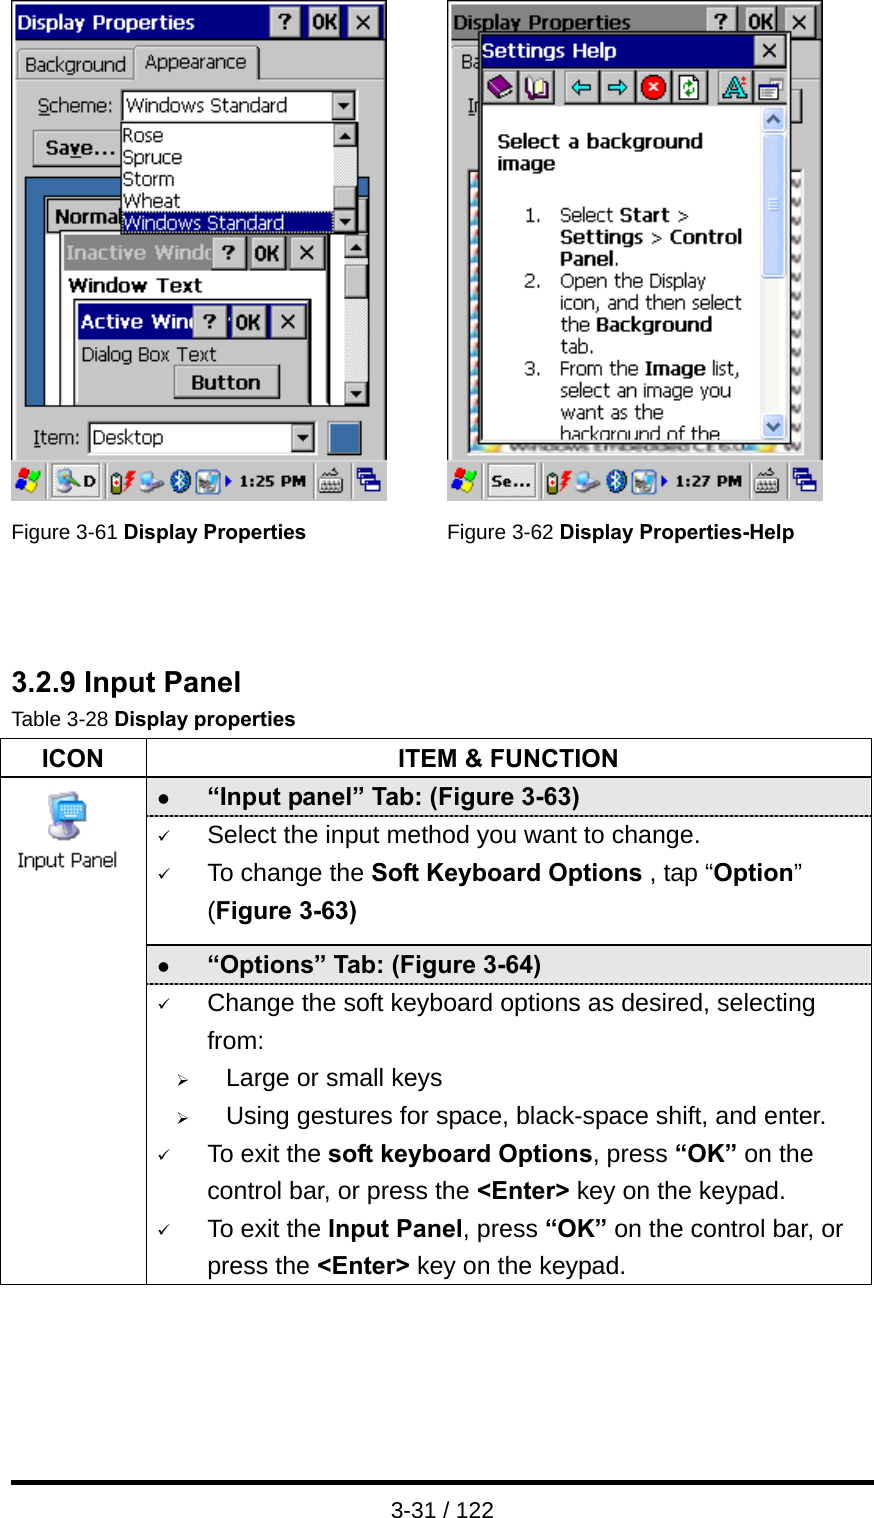  3-31 / 122    Figure 3-61 Display Properties Figure 3-62 Display Properties-Help    3.2.9 Input Panel Table 3-28 Display properties ICON  ITEM &amp; FUNCTION z “Input panel” Tab: (Figure 3-63) 9 Select the input method you want to change. 9 To change the Soft Keyboard Options , tap “Option” (Figure 3-63) z “Options” Tab: (Figure 3-64)  9 Change the soft keyboard options as desired, selecting from: ¾ Large or small keys ¾ Using gestures for space, black-space shift, and enter. 9 To exit the soft keyboard Options, press “OK” on the control bar, or press the &lt;Enter&gt; key on the keypad. 9 To exit the Input Panel, press “OK” on the control bar, or press the &lt;Enter&gt; key on the keypad.    